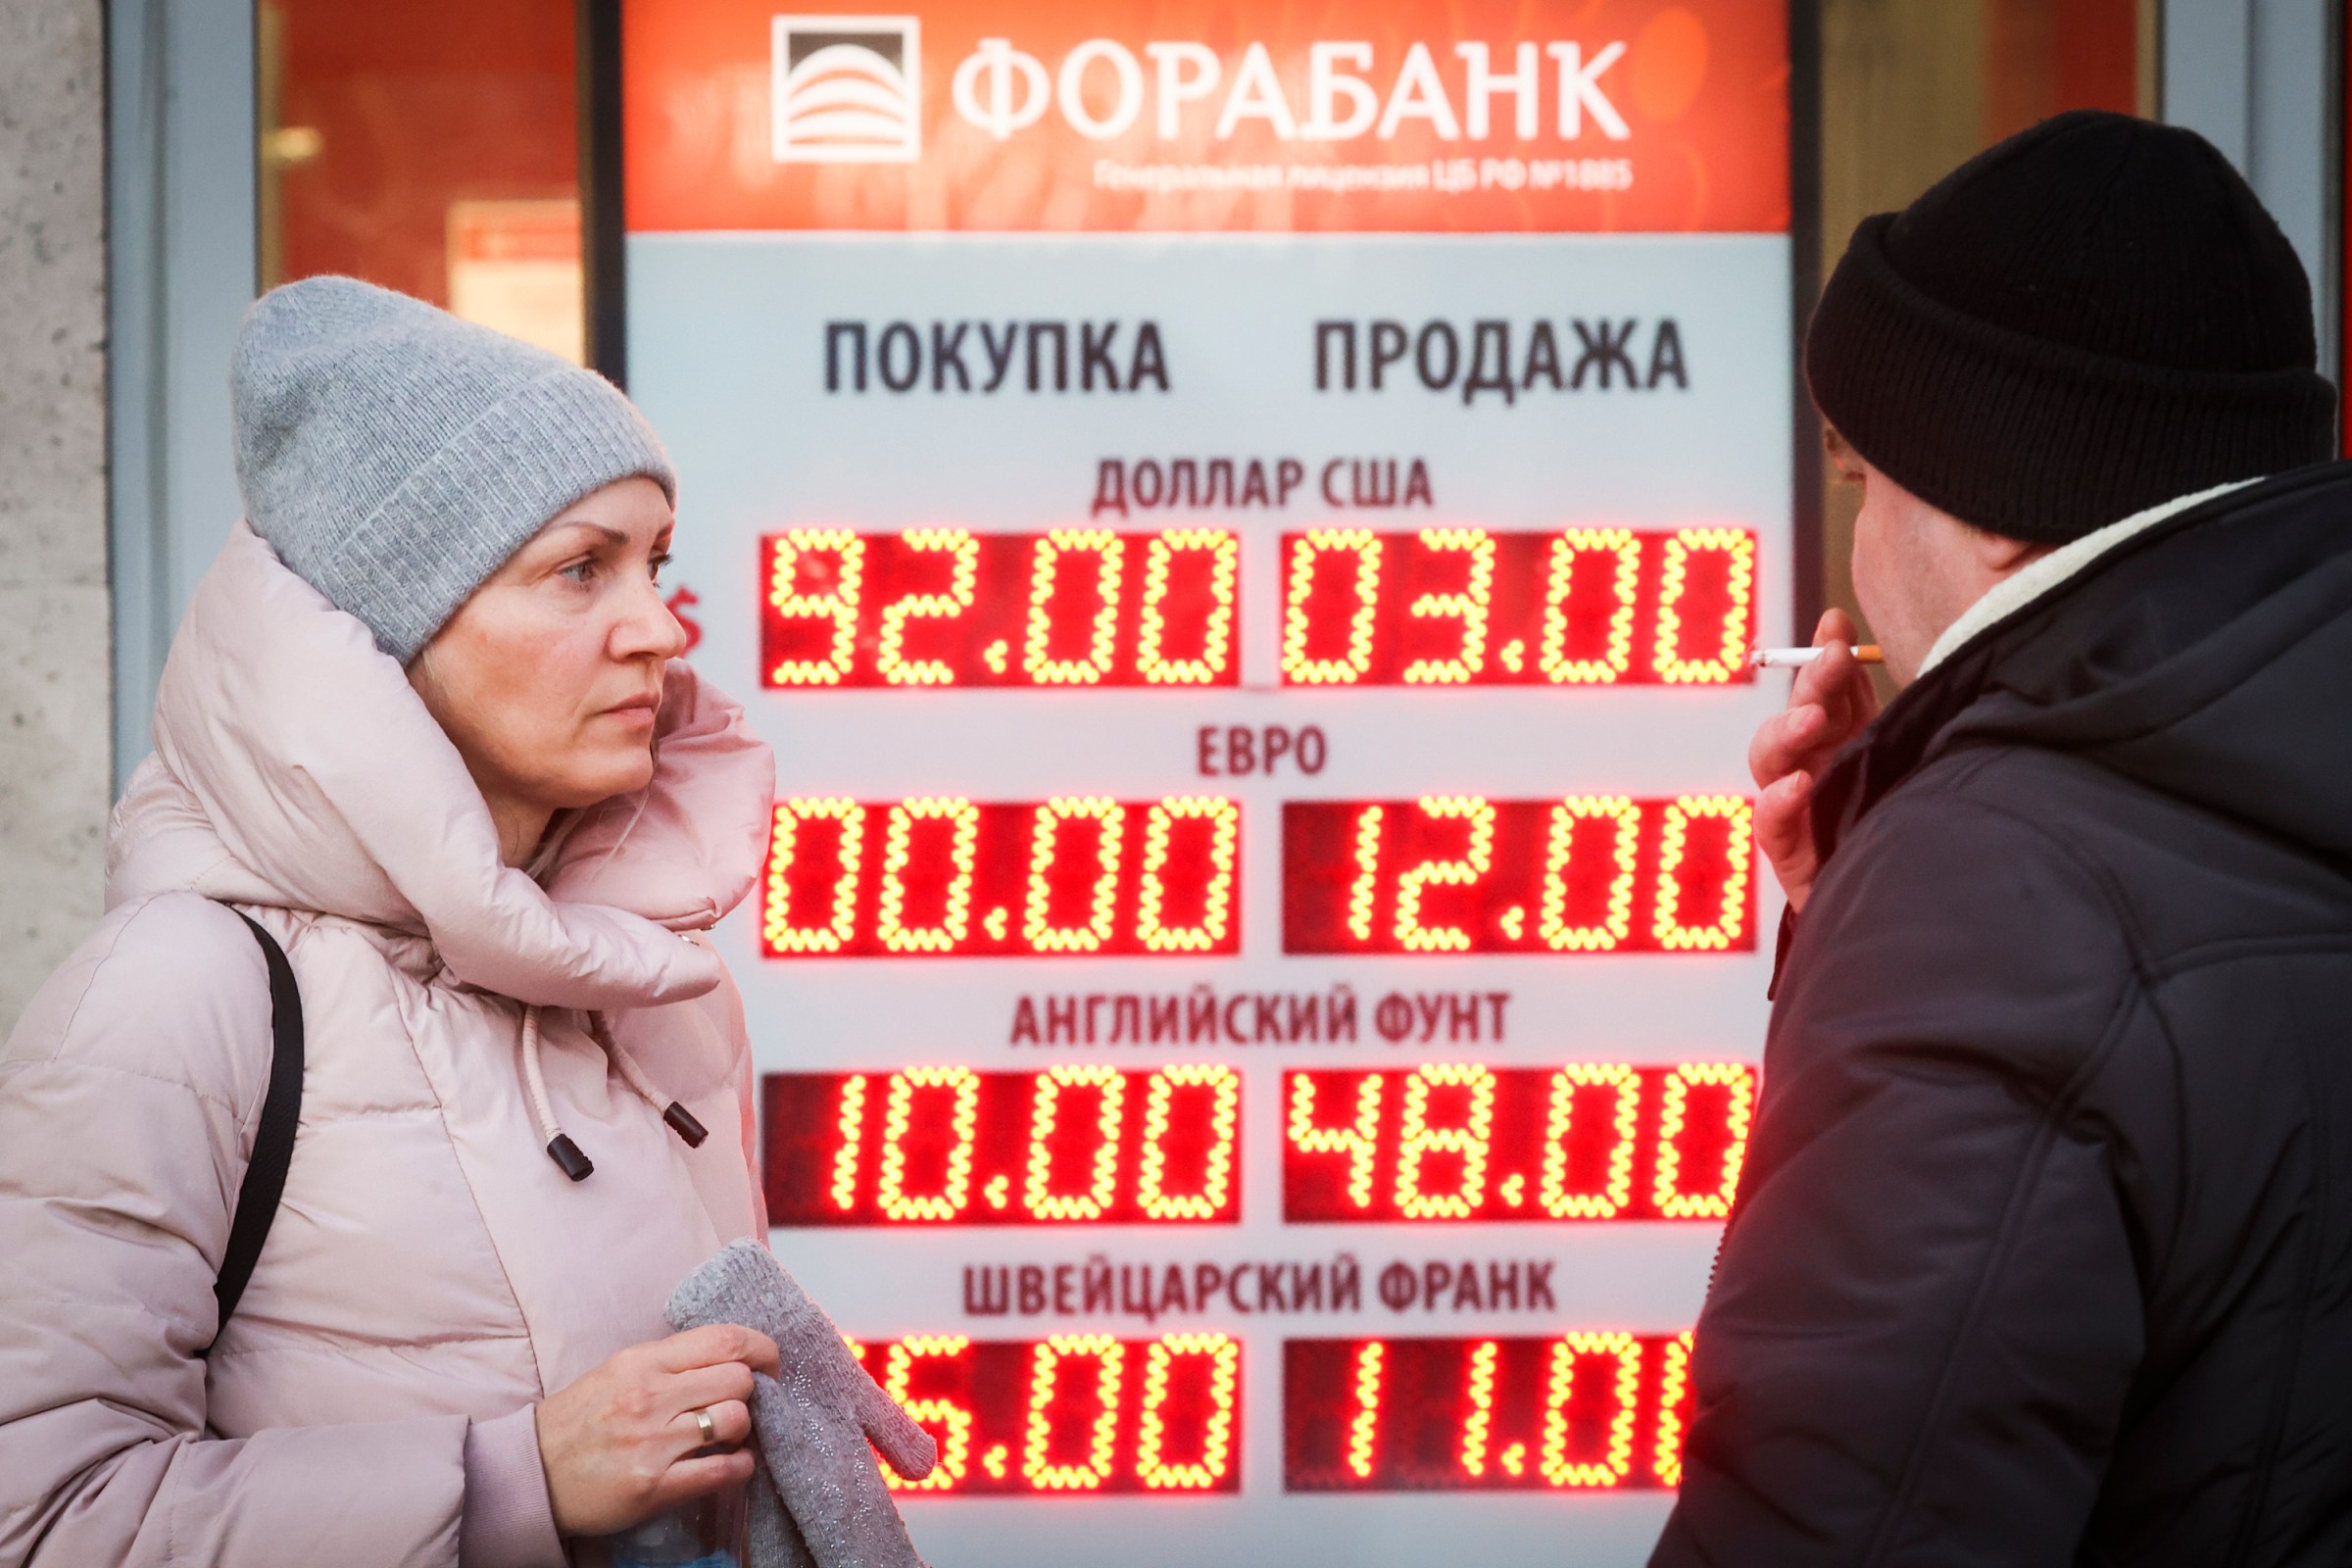 A currency exchange information board in Moscow on March 1. JPMorgan estimates that Russia’s economy will shrink 35 percent in the second quarter of 2022 and 7 percent for the entire year.